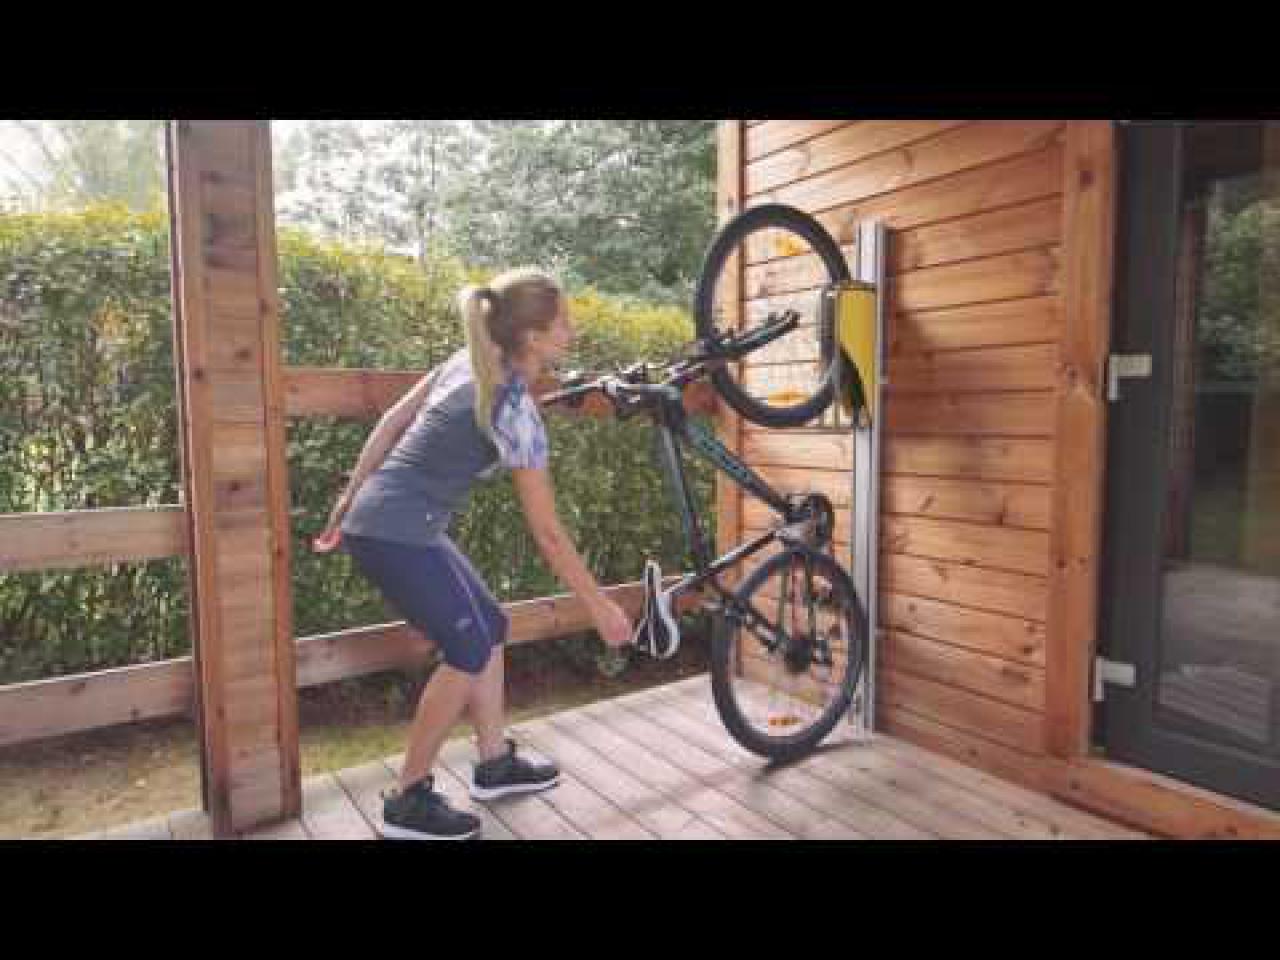 vertical bicycle lift